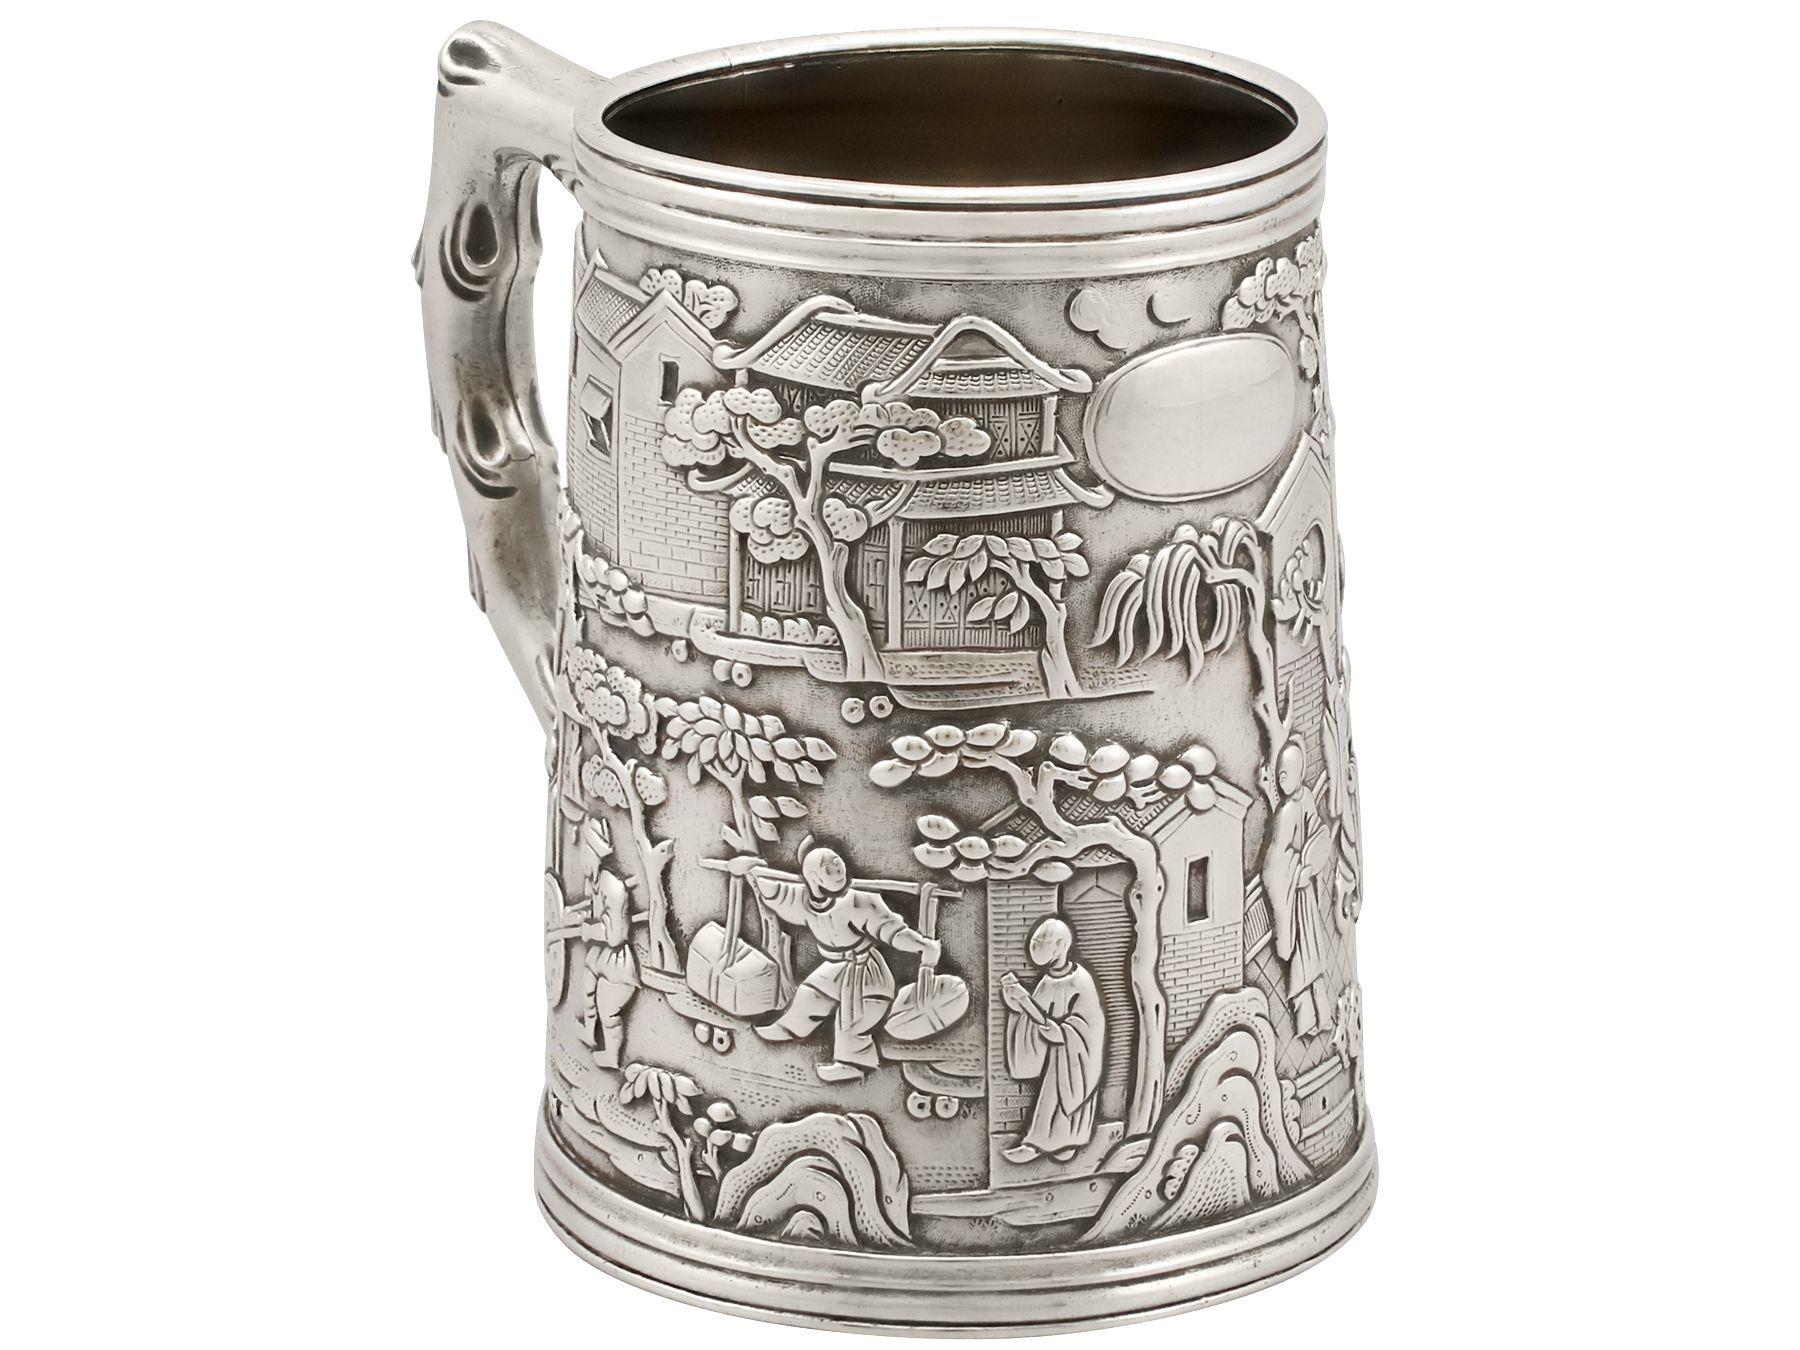 An exceptional, fine and impressive antique Chinese Export silver mug; an addition to our antique silver collection

This exceptional antique Chinese Export silver mug has a tapering cylindrical form.

The surface of this impressive Chinese